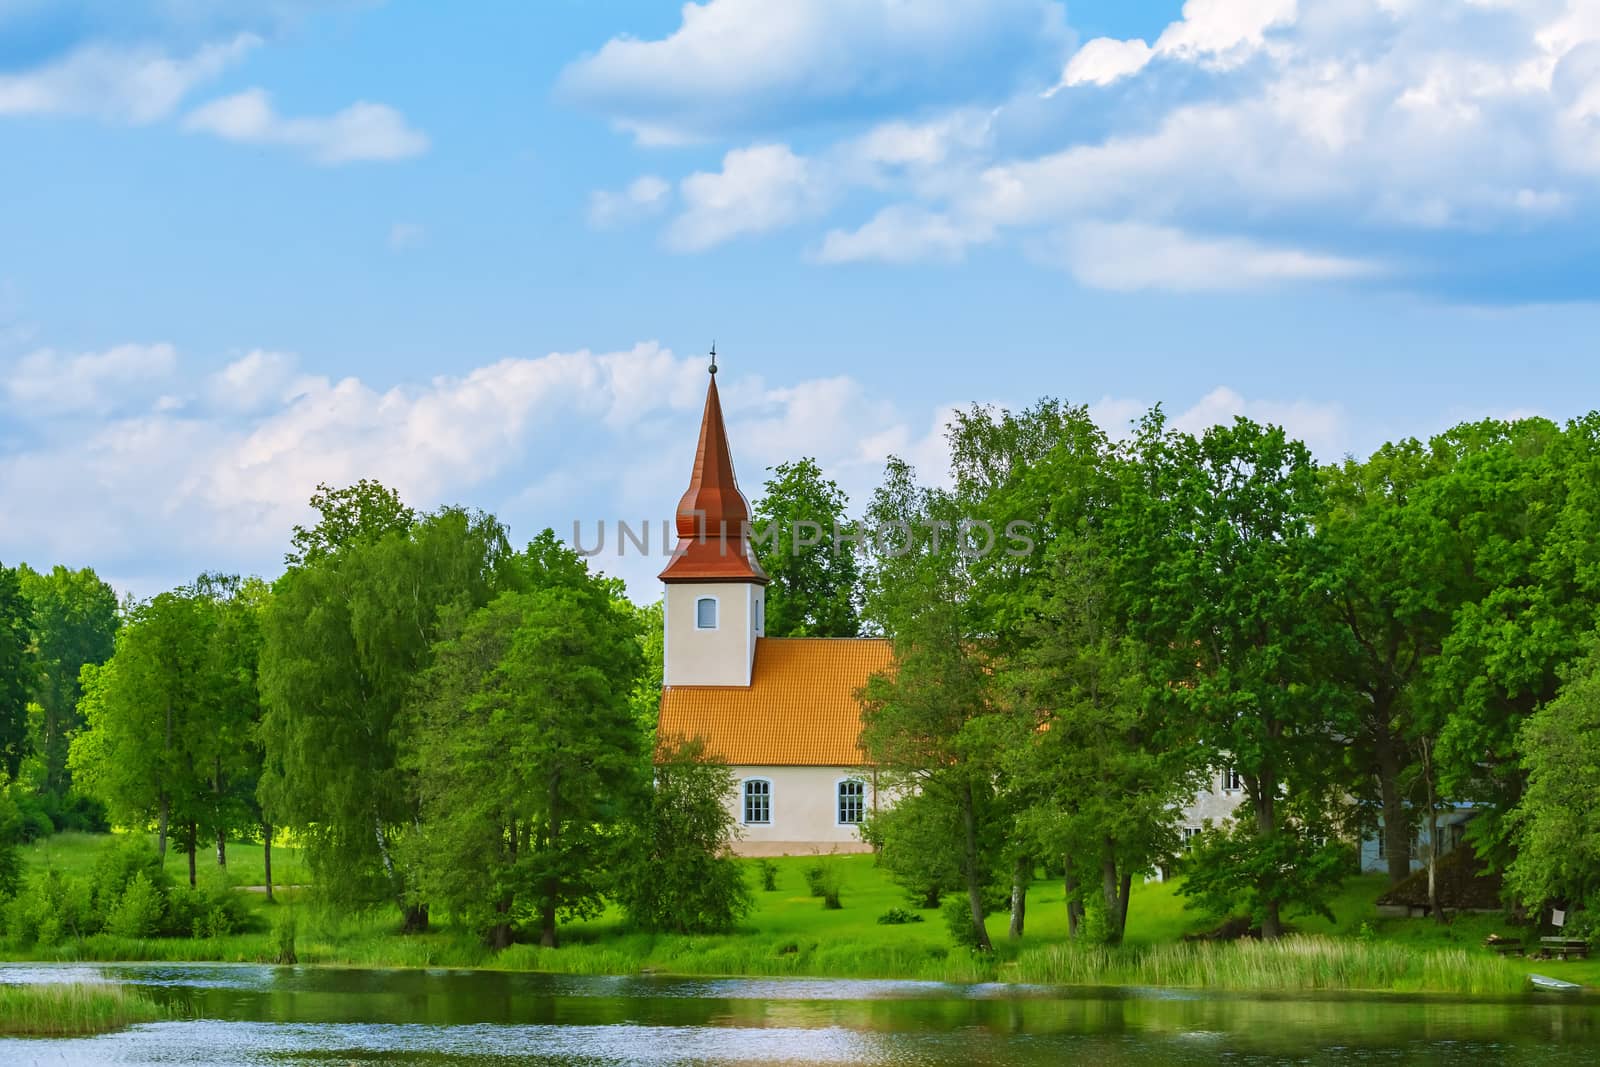 Old church on the bank of the lake